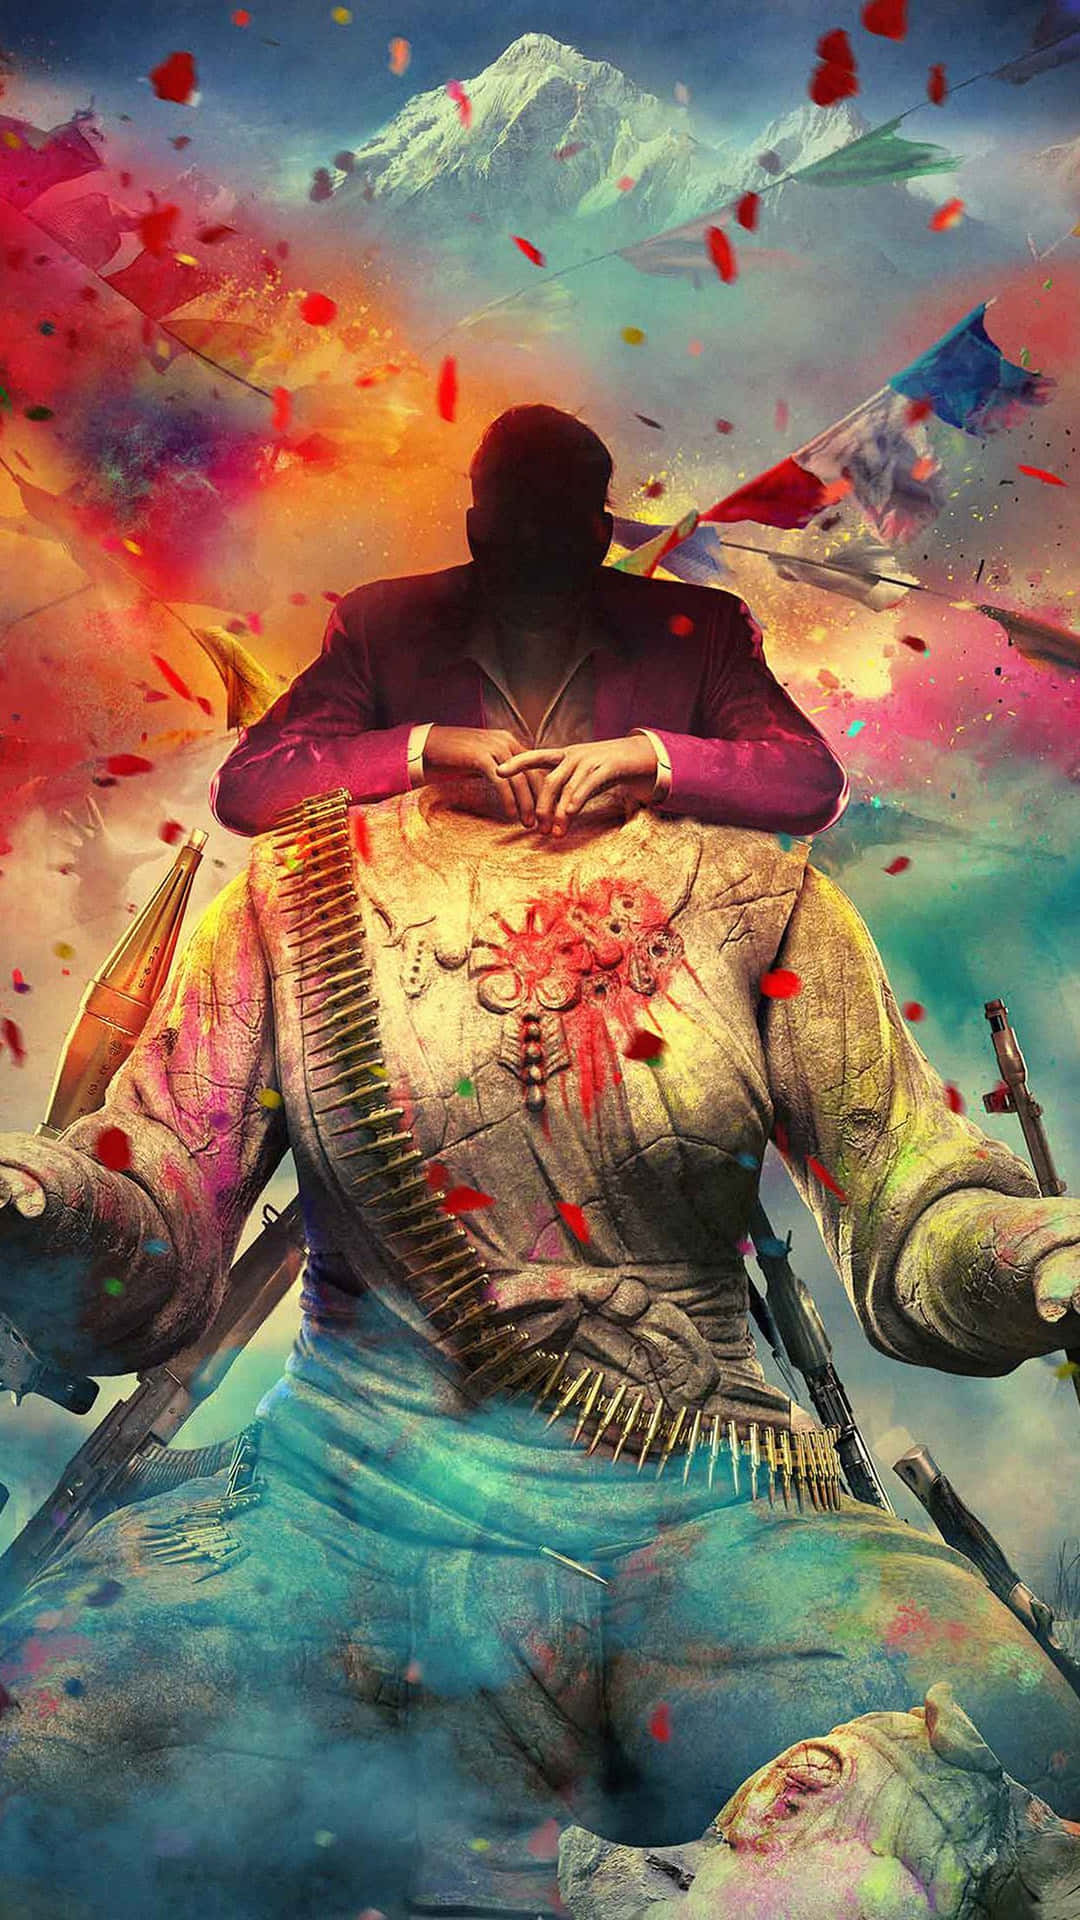 "Go Off the Grid with Far Cry 4" Wallpaper